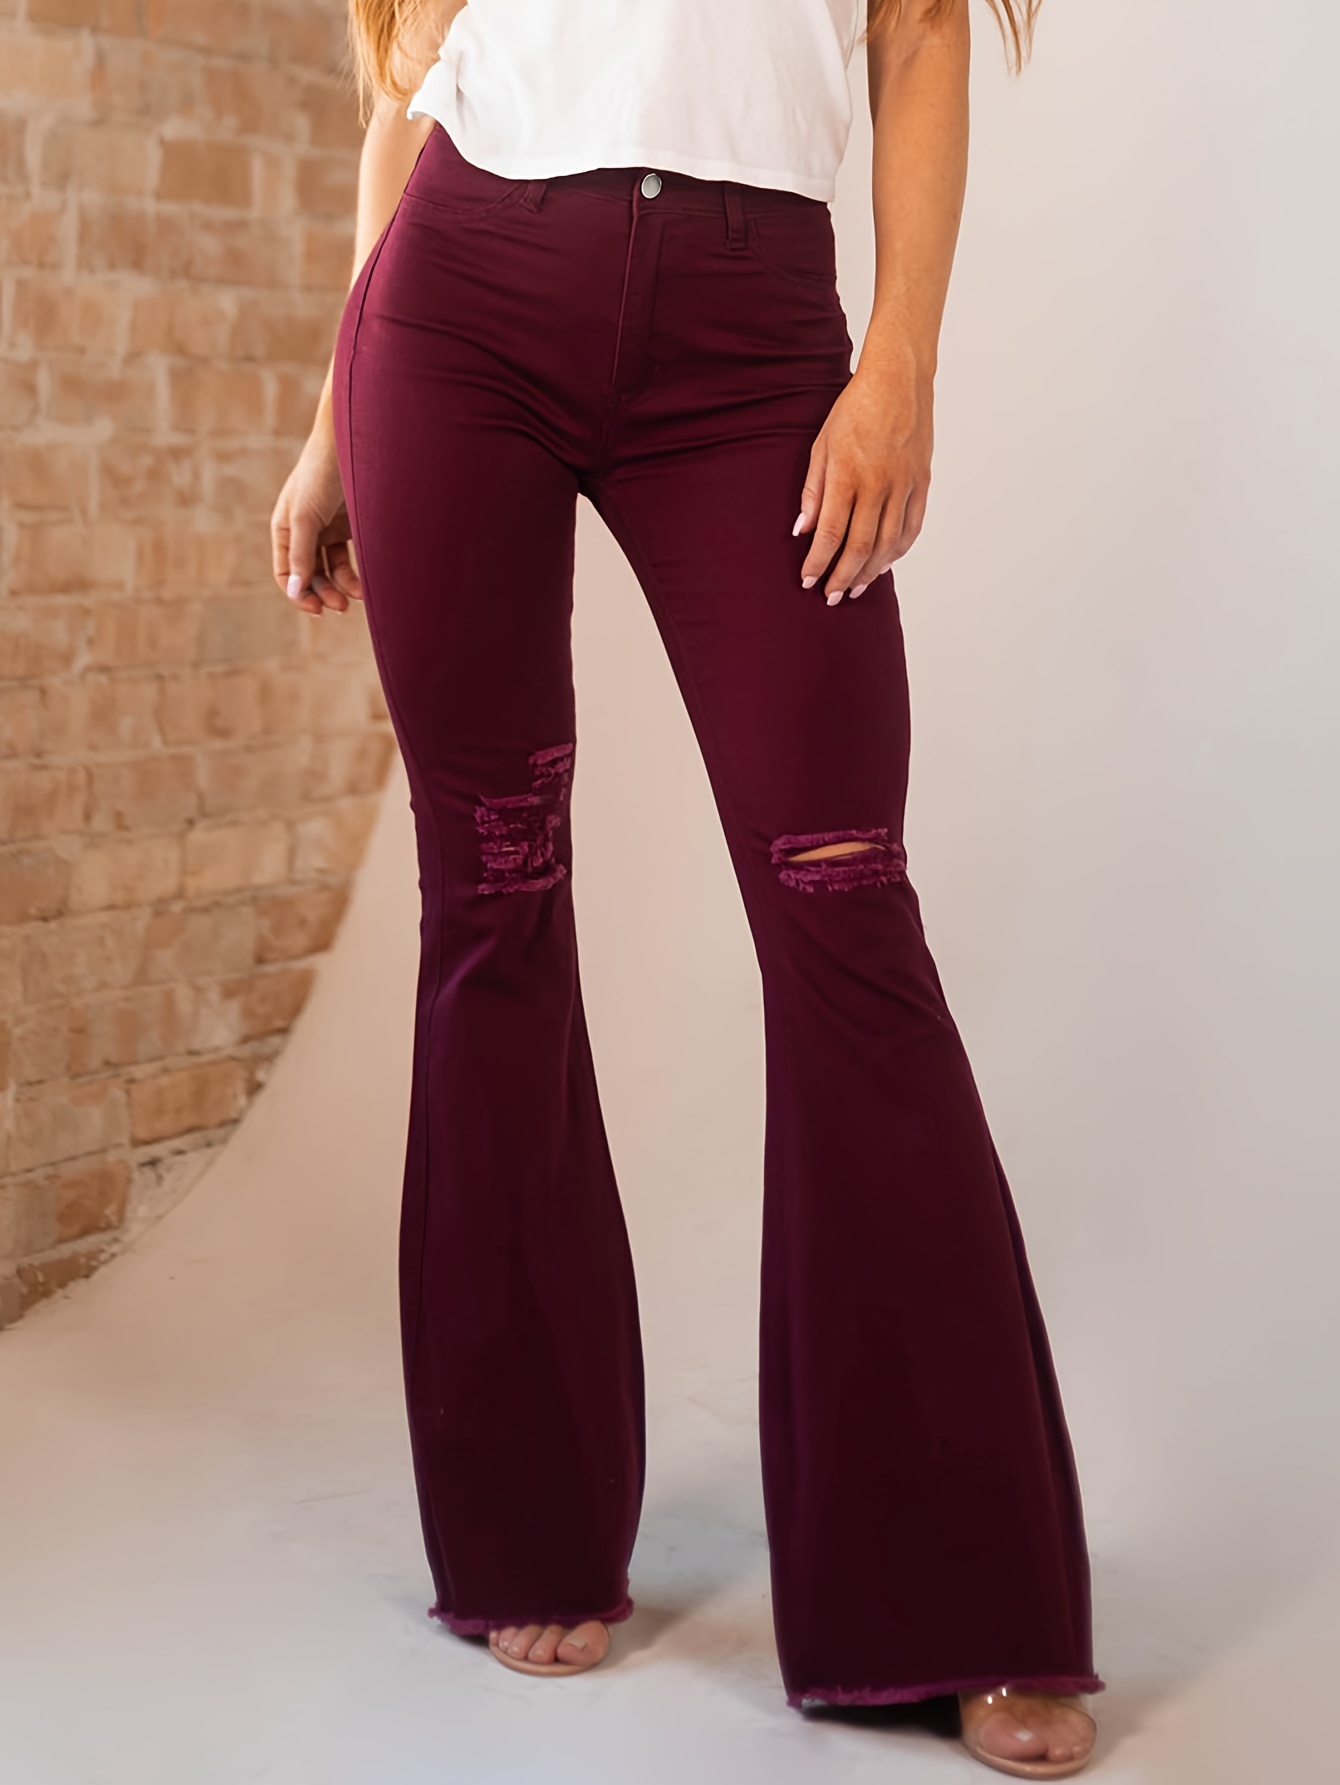 Burgundy Ripped Holes Bell Bottom Jeans *-waisted * Trim Loose Stretchy  Flare Jeans, Women's Denim Jeans & Clothing